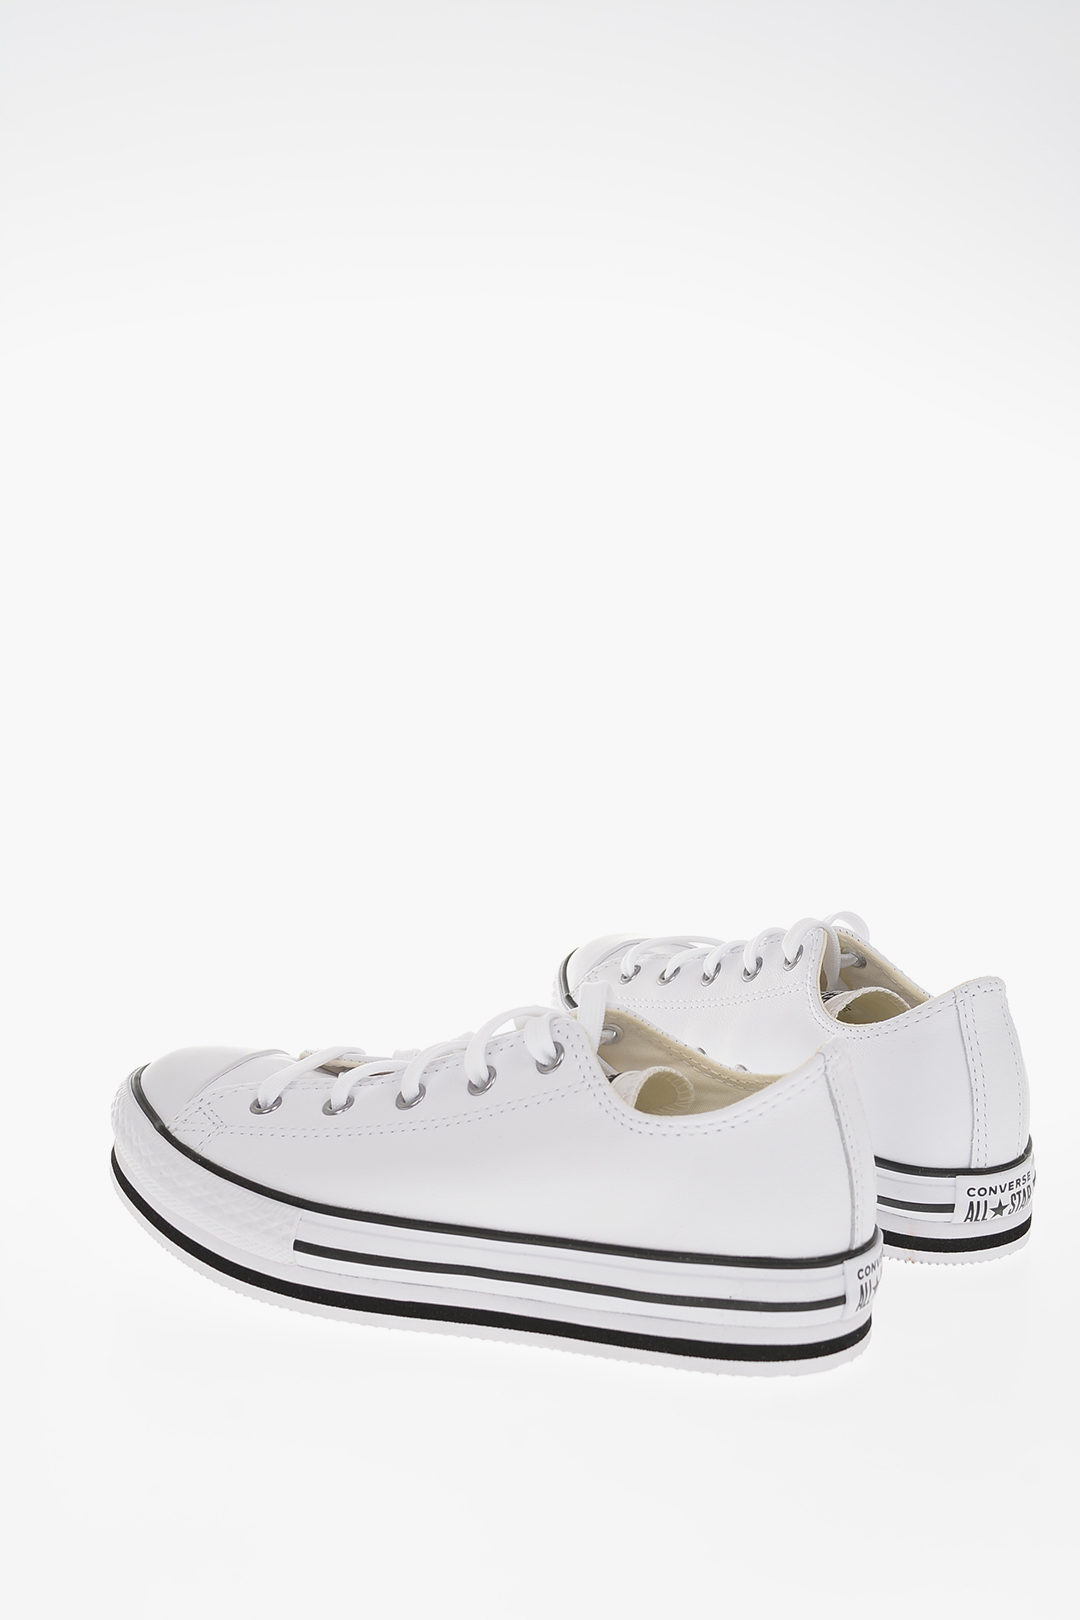 converse for kids girls